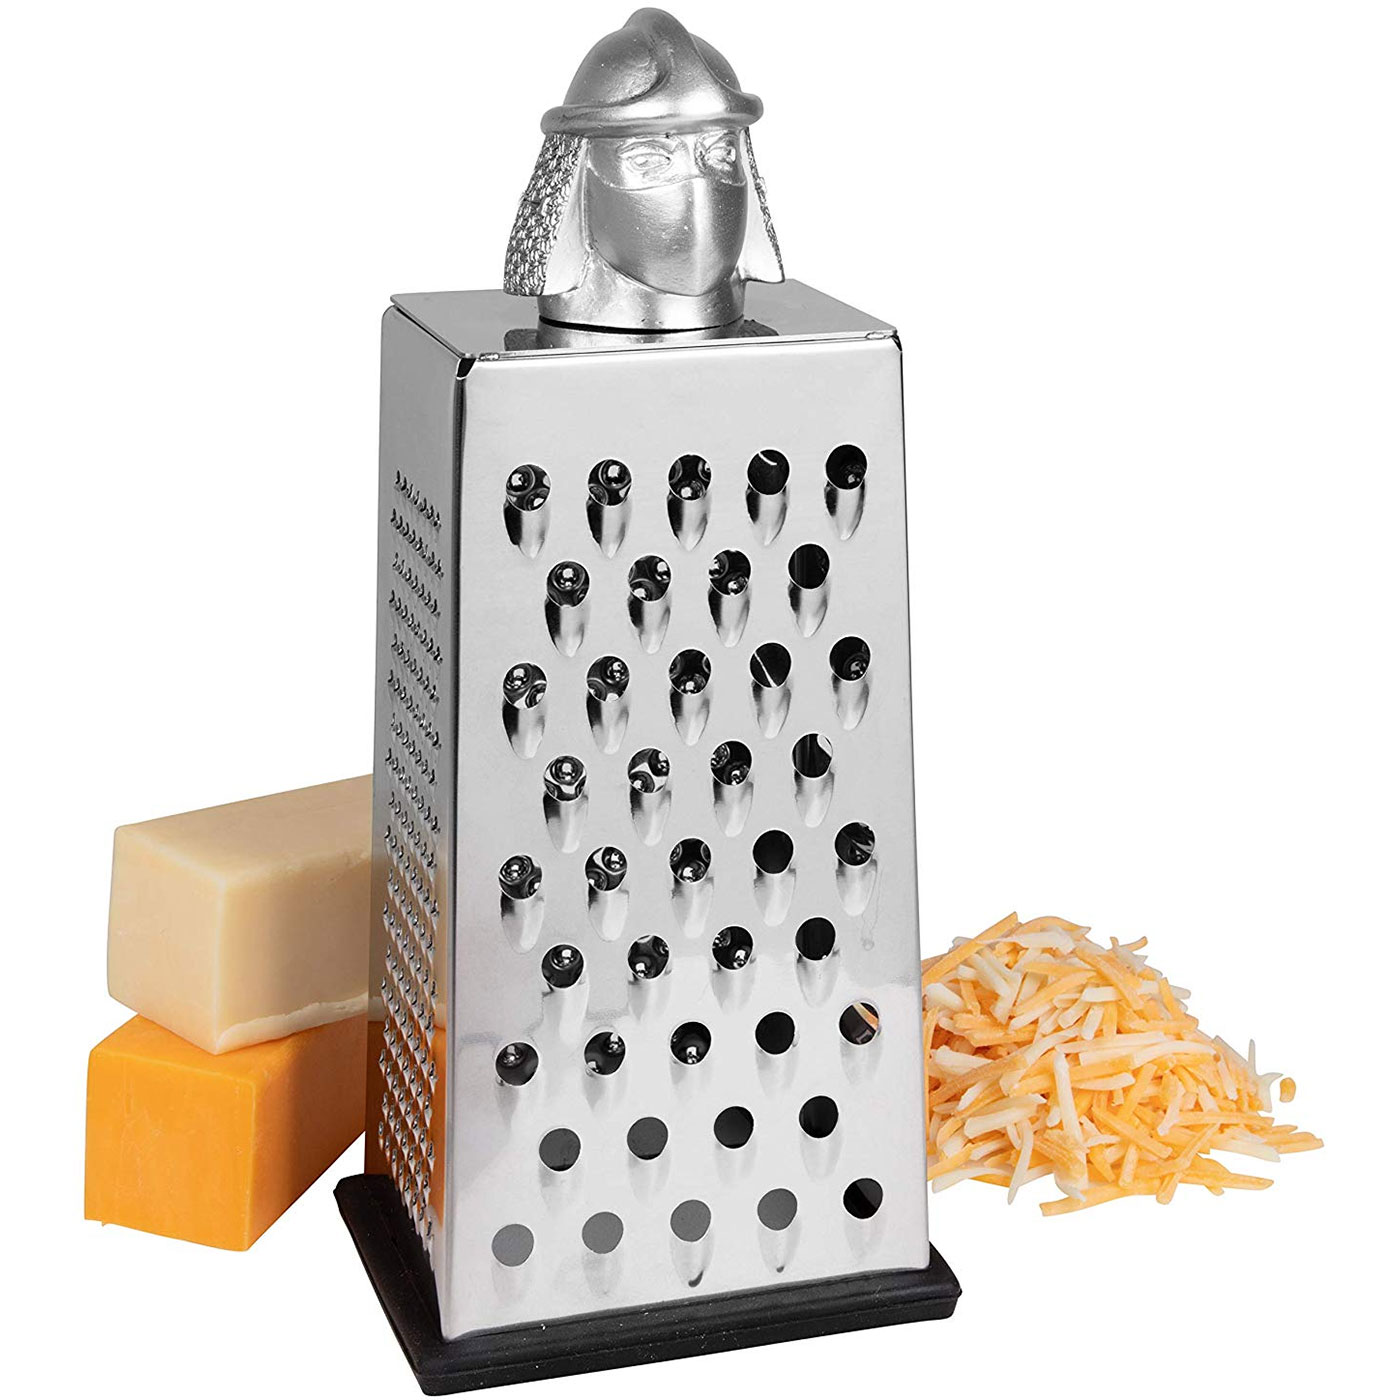 Master Shredder was based on a cheese grater